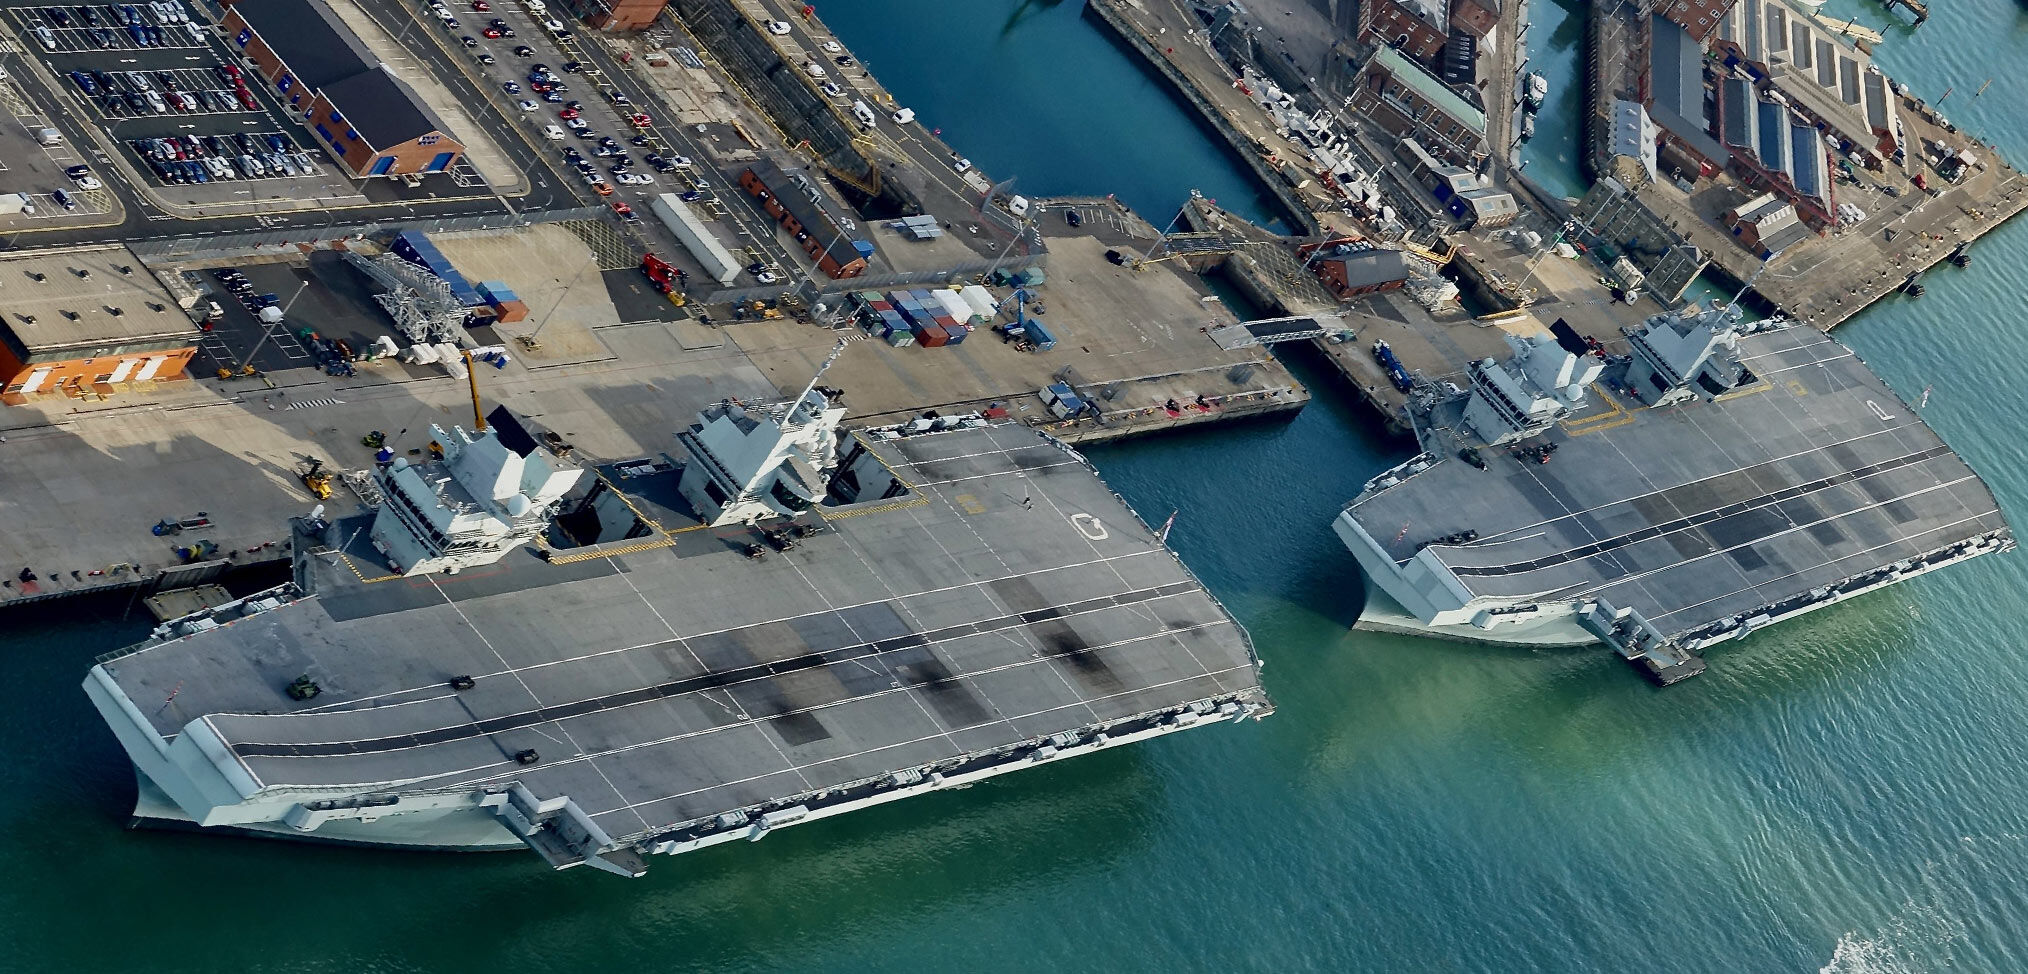 Mechanical issue prevents HMS Queen Elizabeth from sailing on NATO exercise